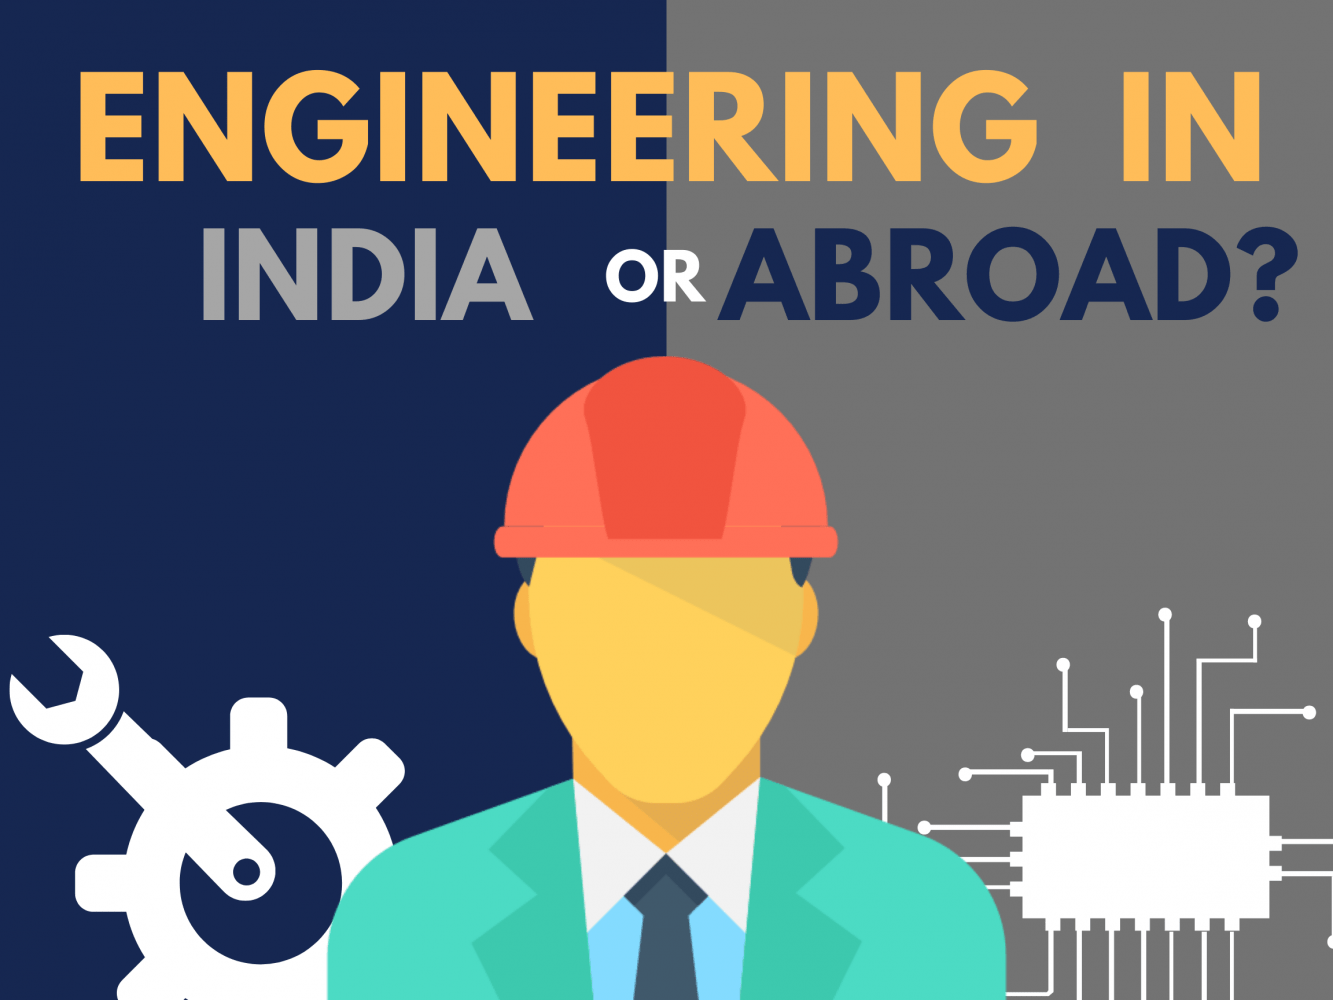 Top 4 things to consider before pursuing Engineering in India or Abroad